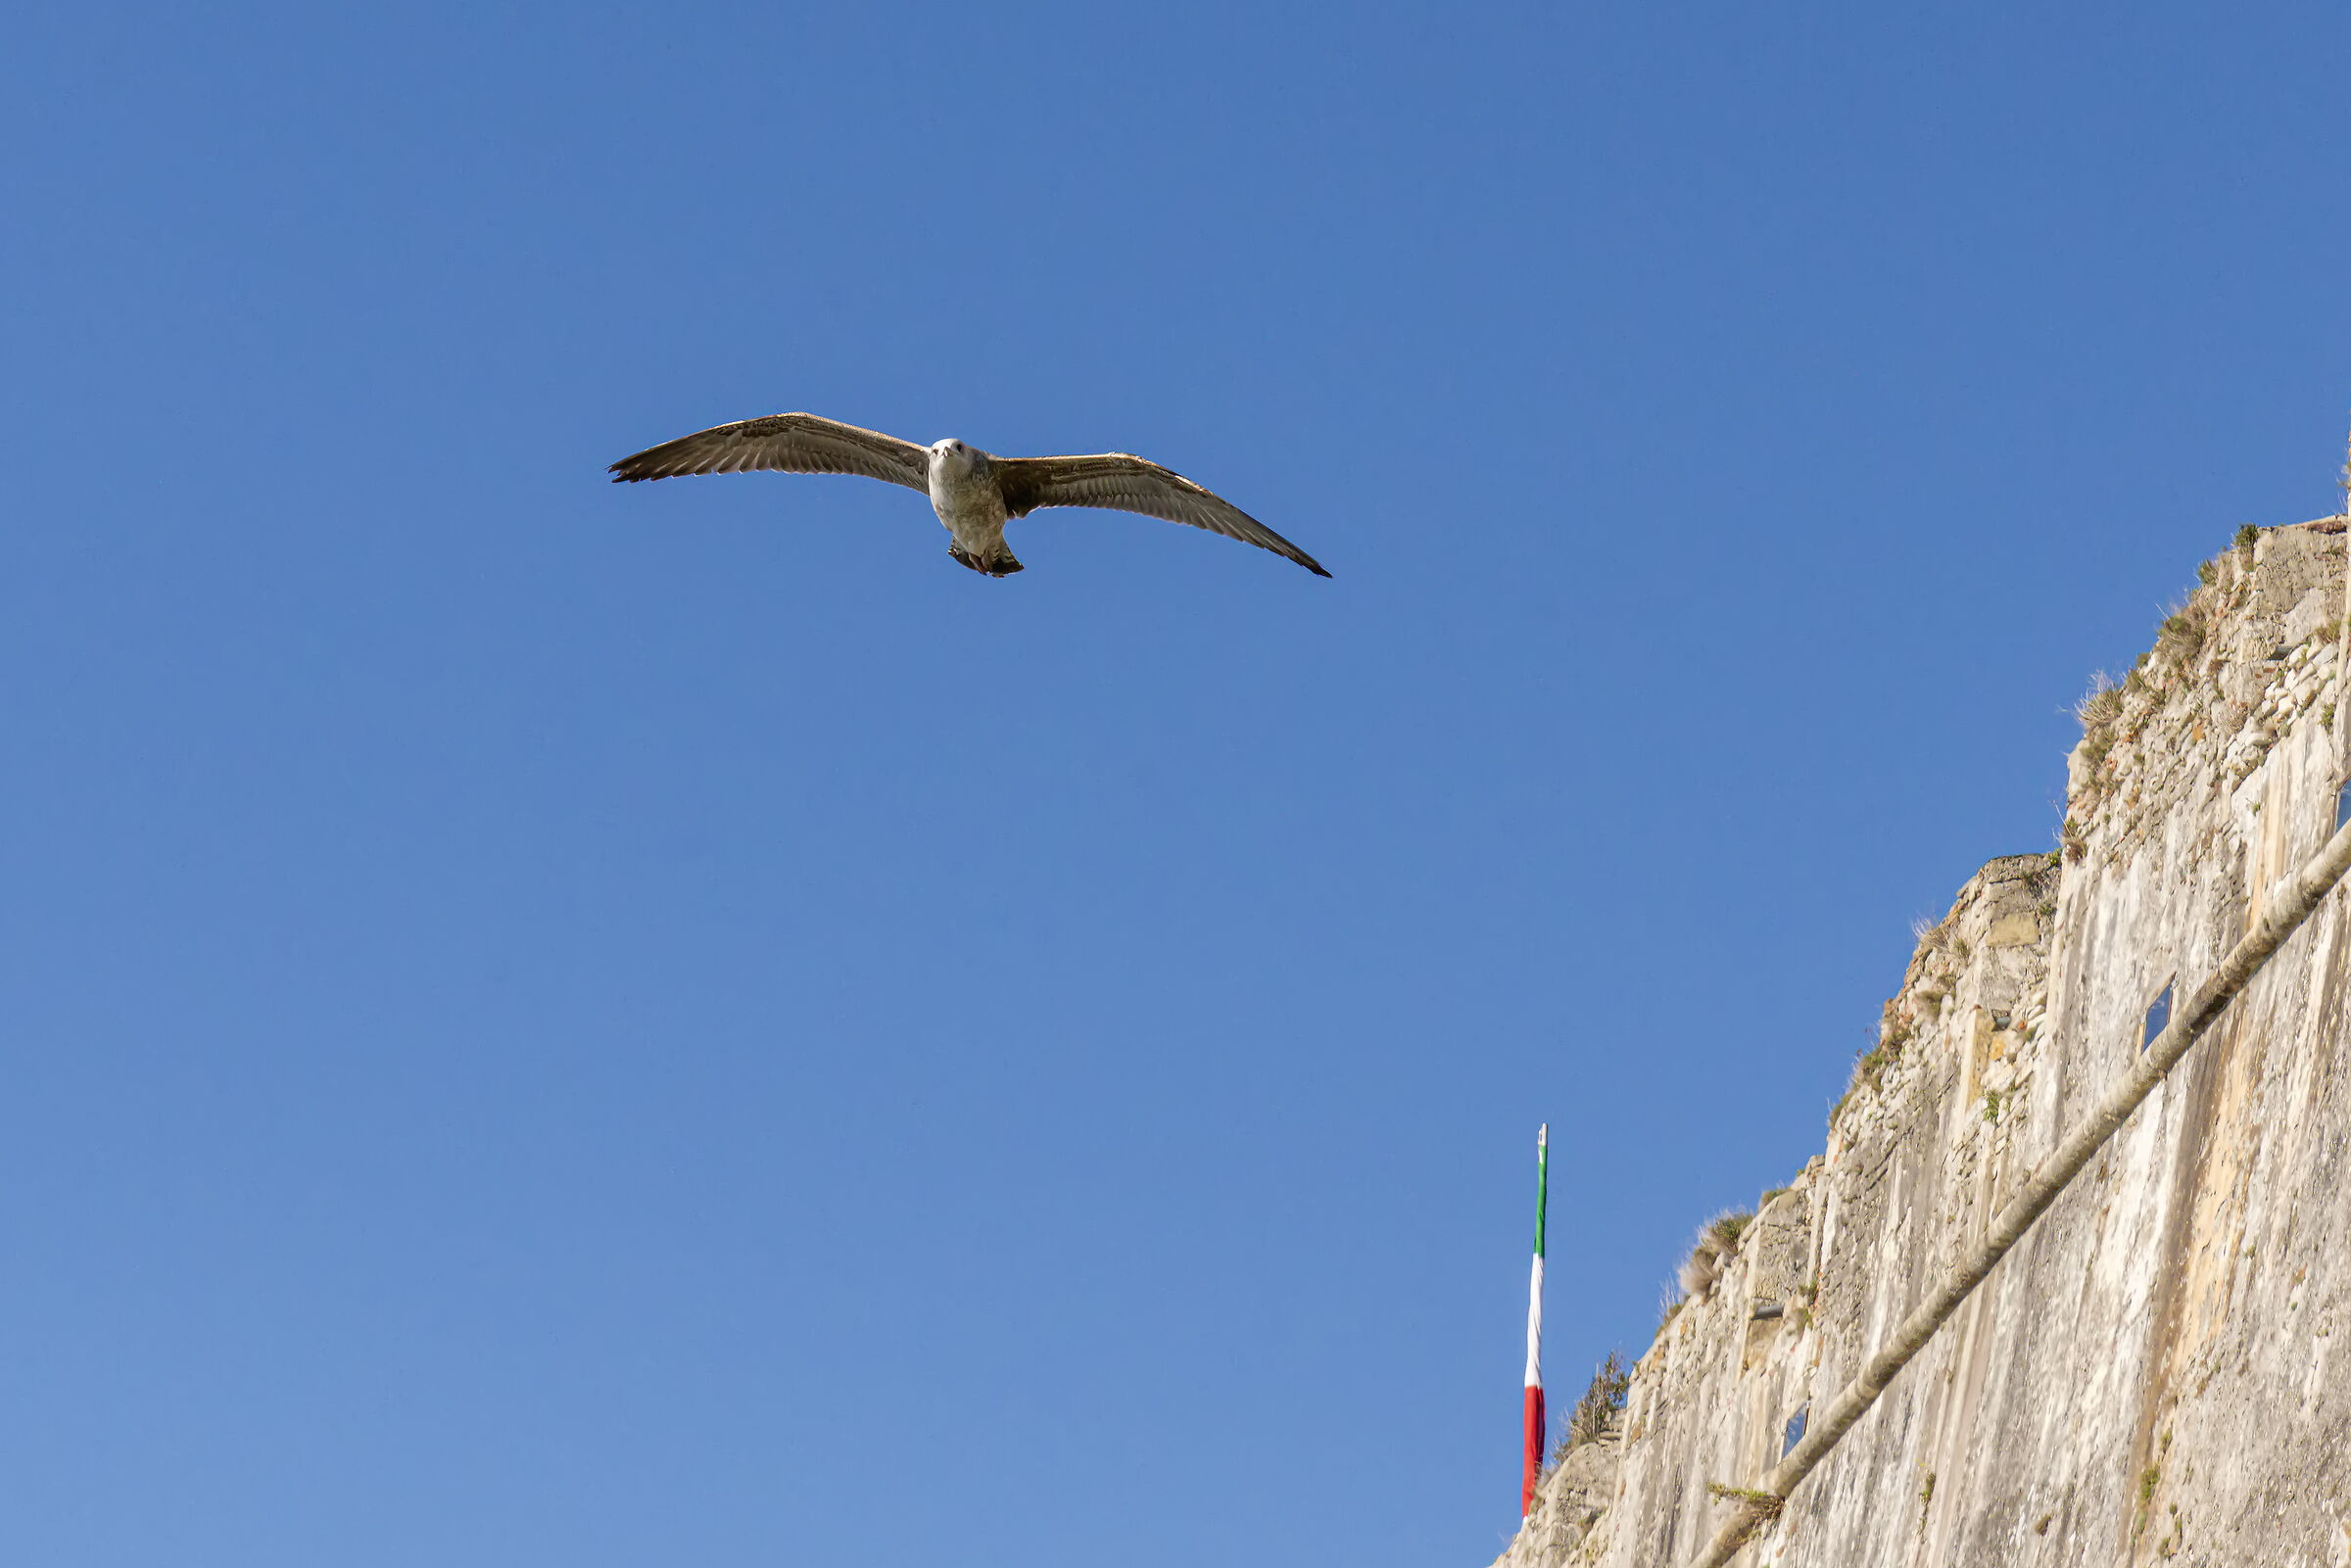 From the ramparts of the castle the flight of the seagull...